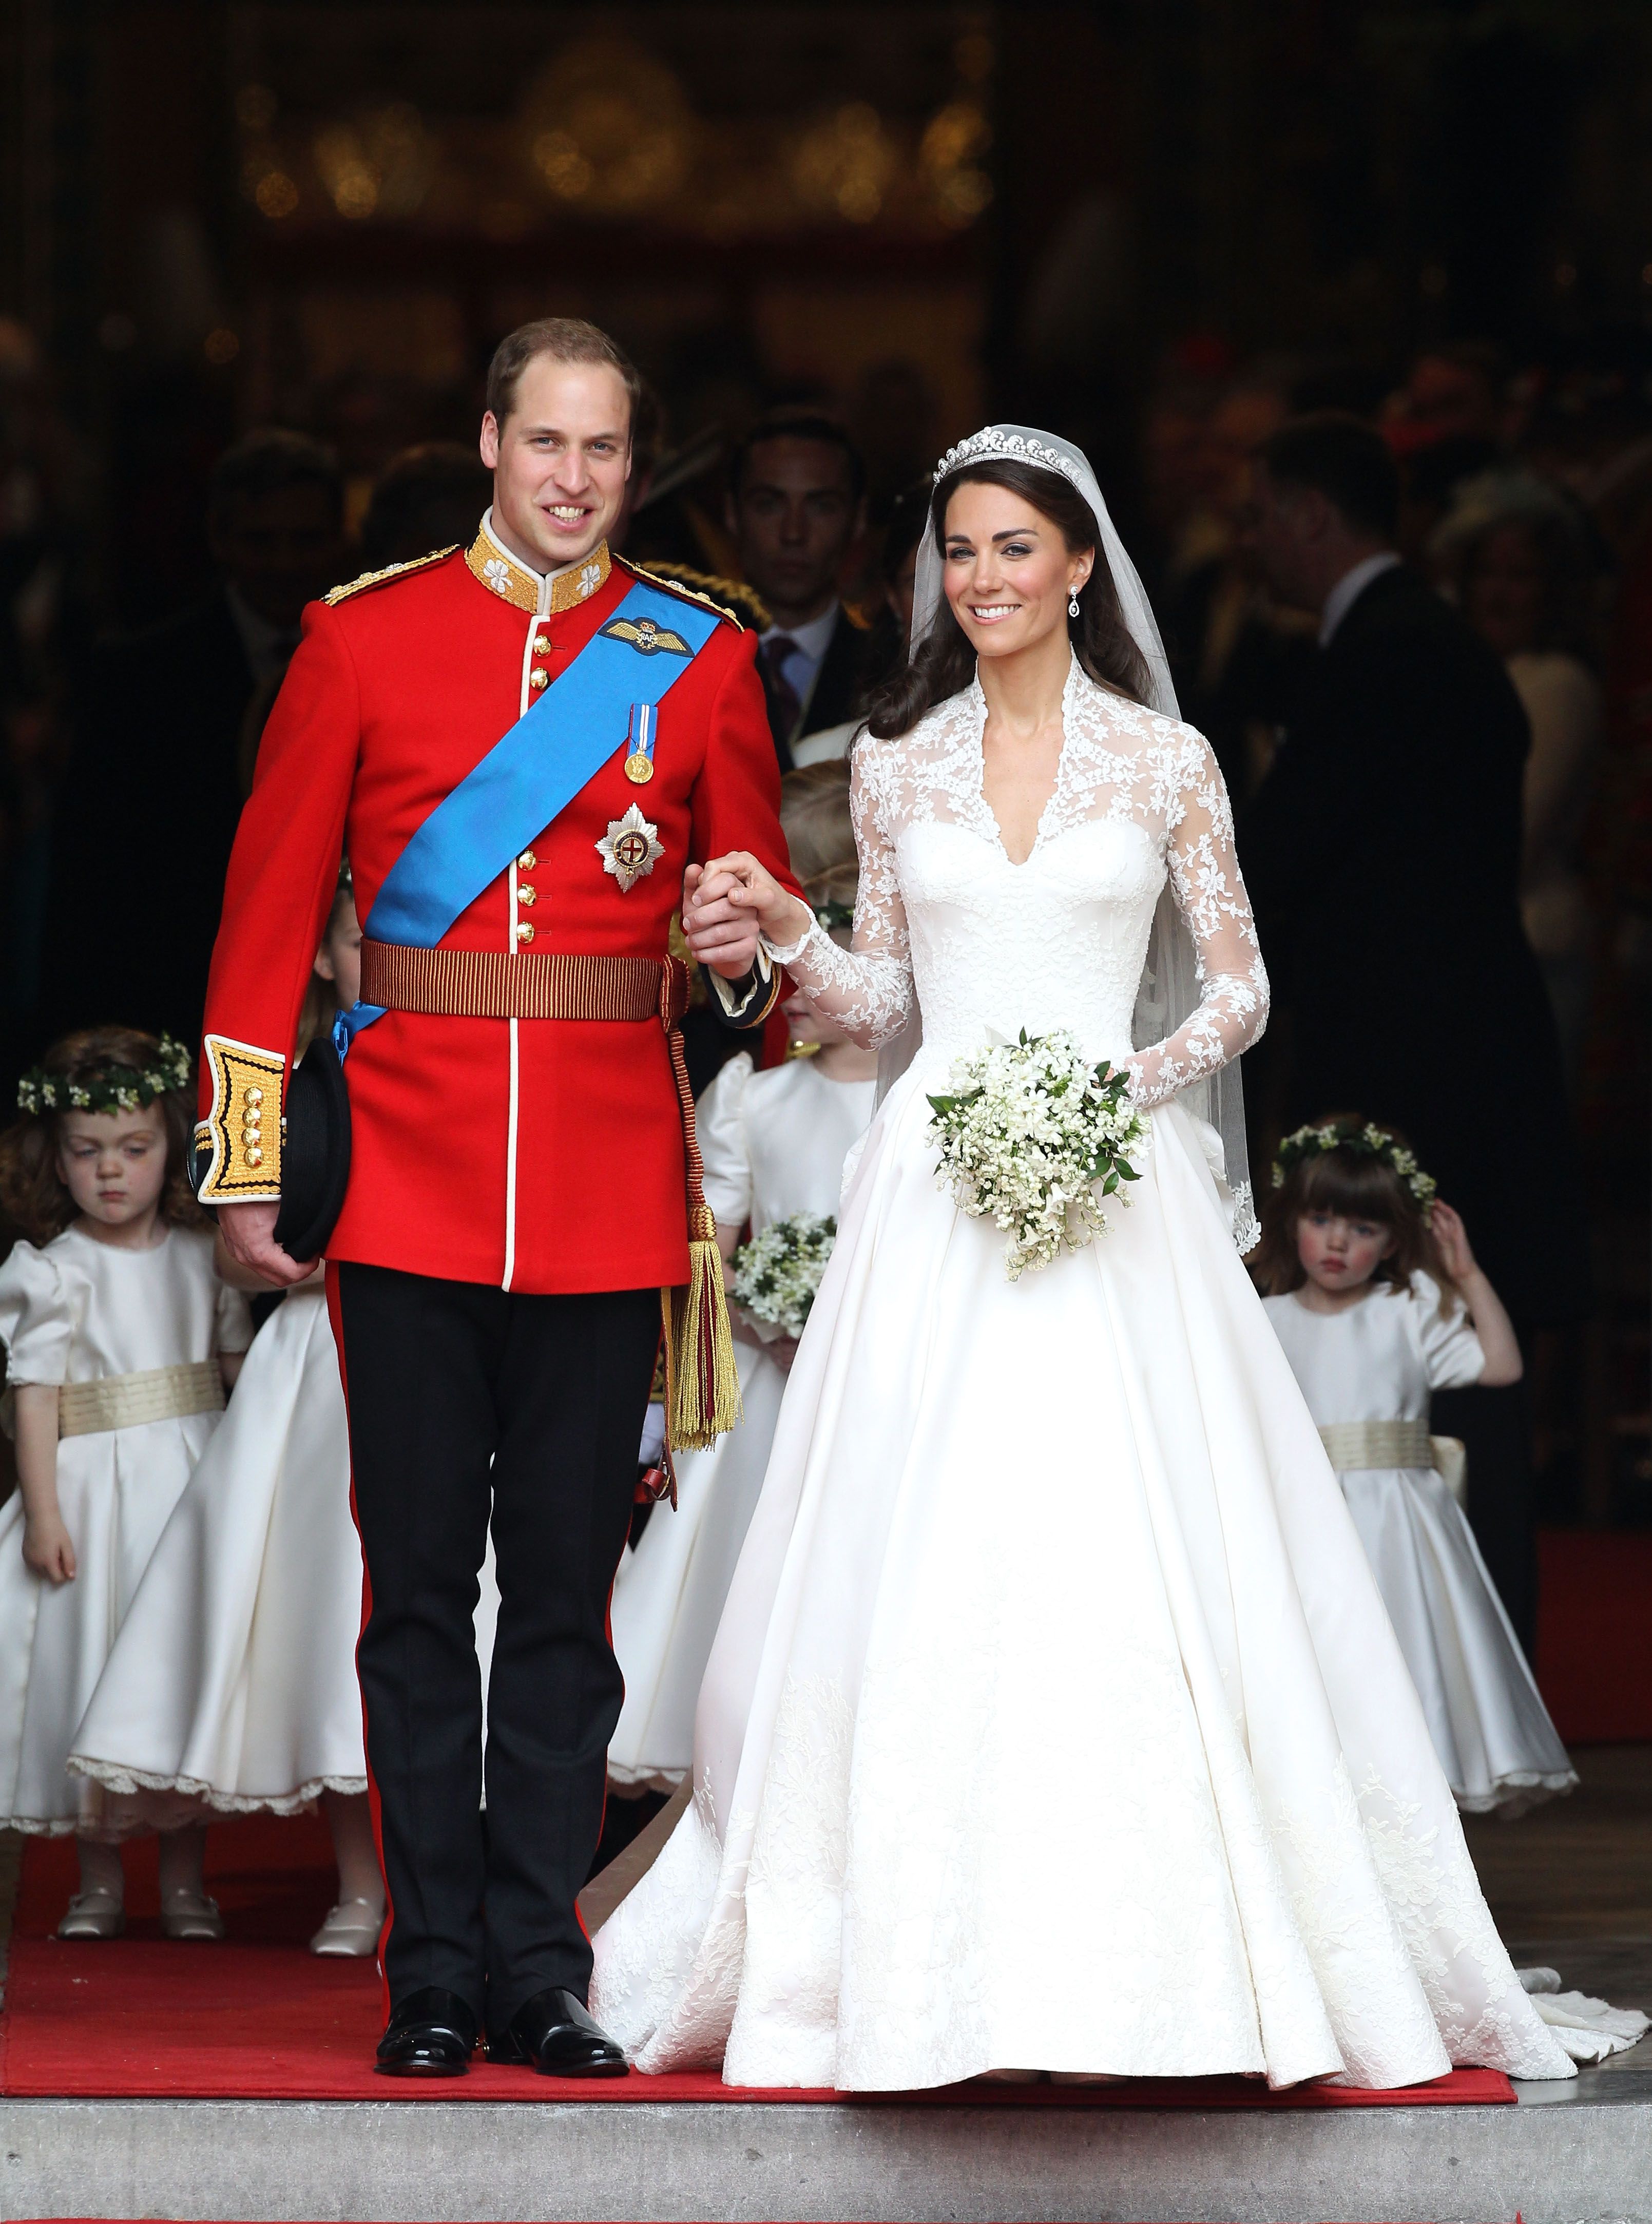 Top 8 Most Iconic Celebrity Wedding Dresses Every Bride Needs To Know